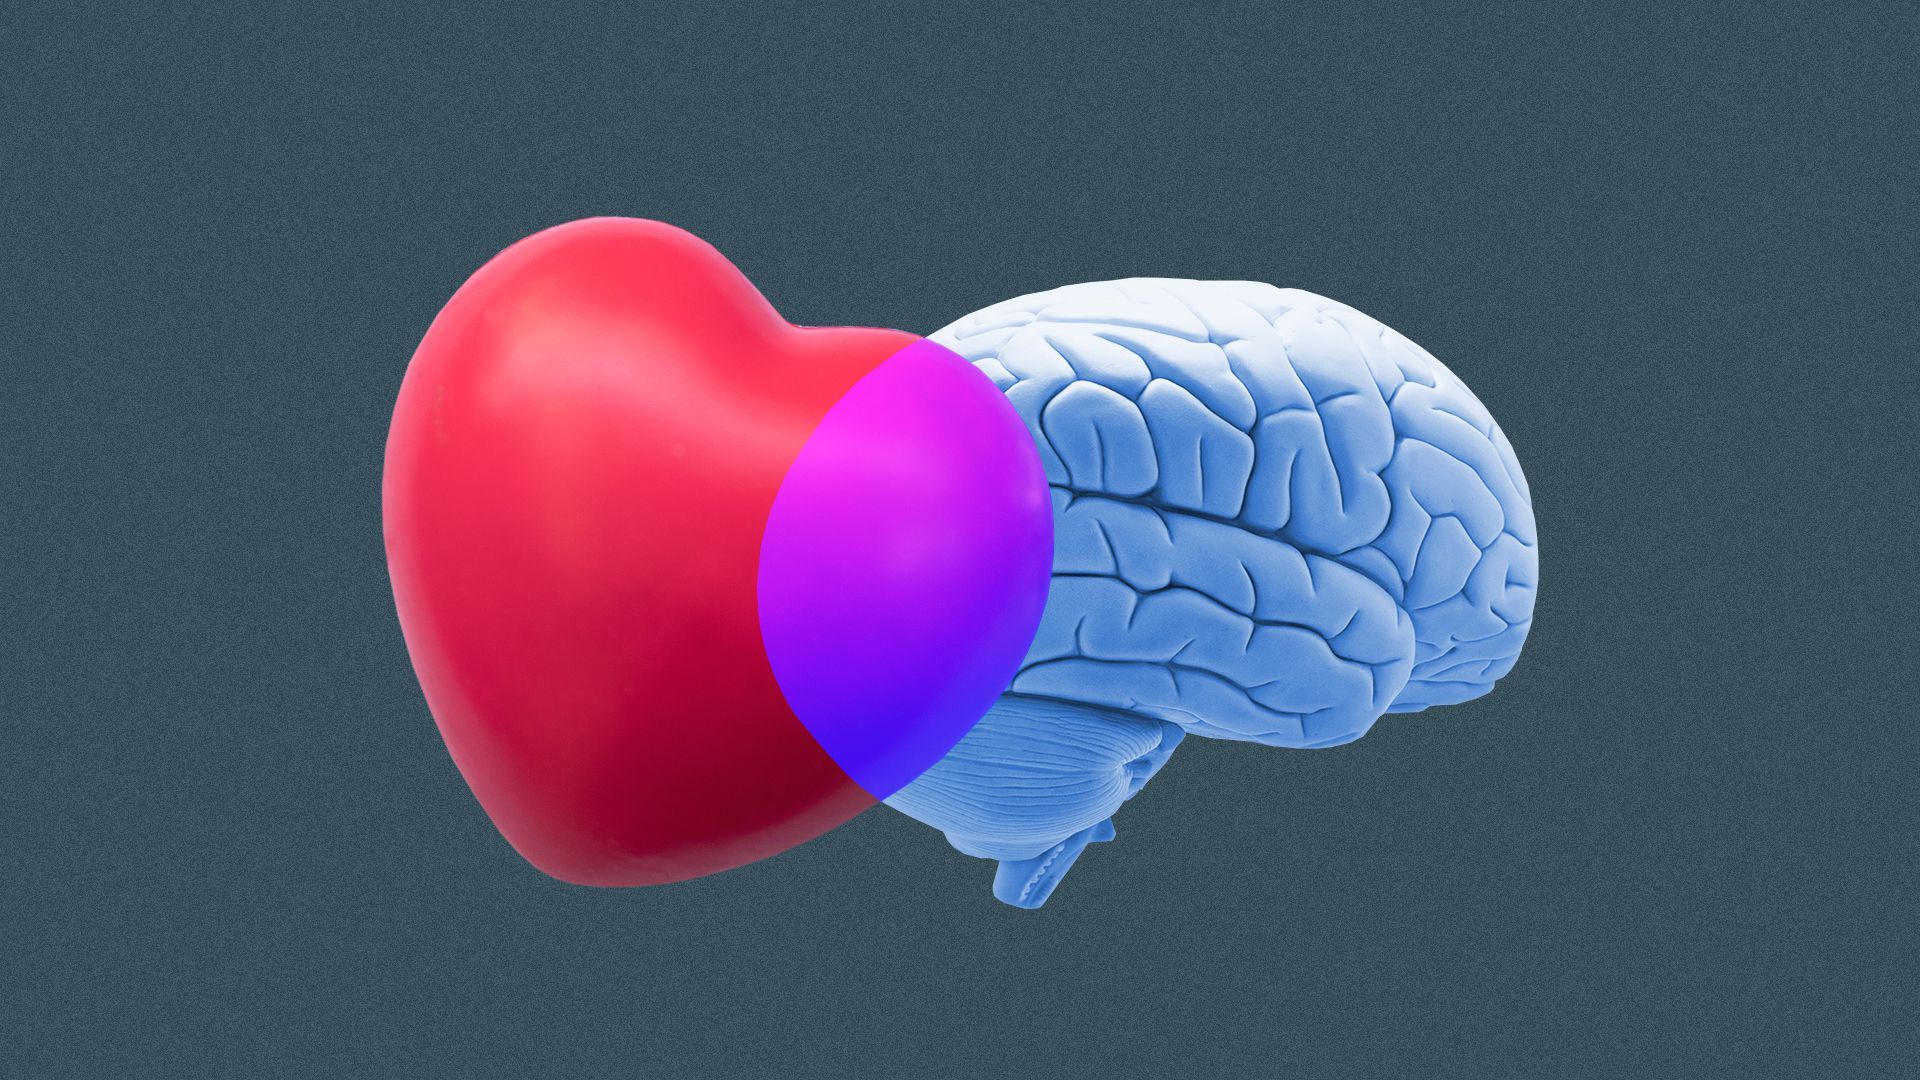 Illustration of a heart and brain overlapping to create a venn diagram